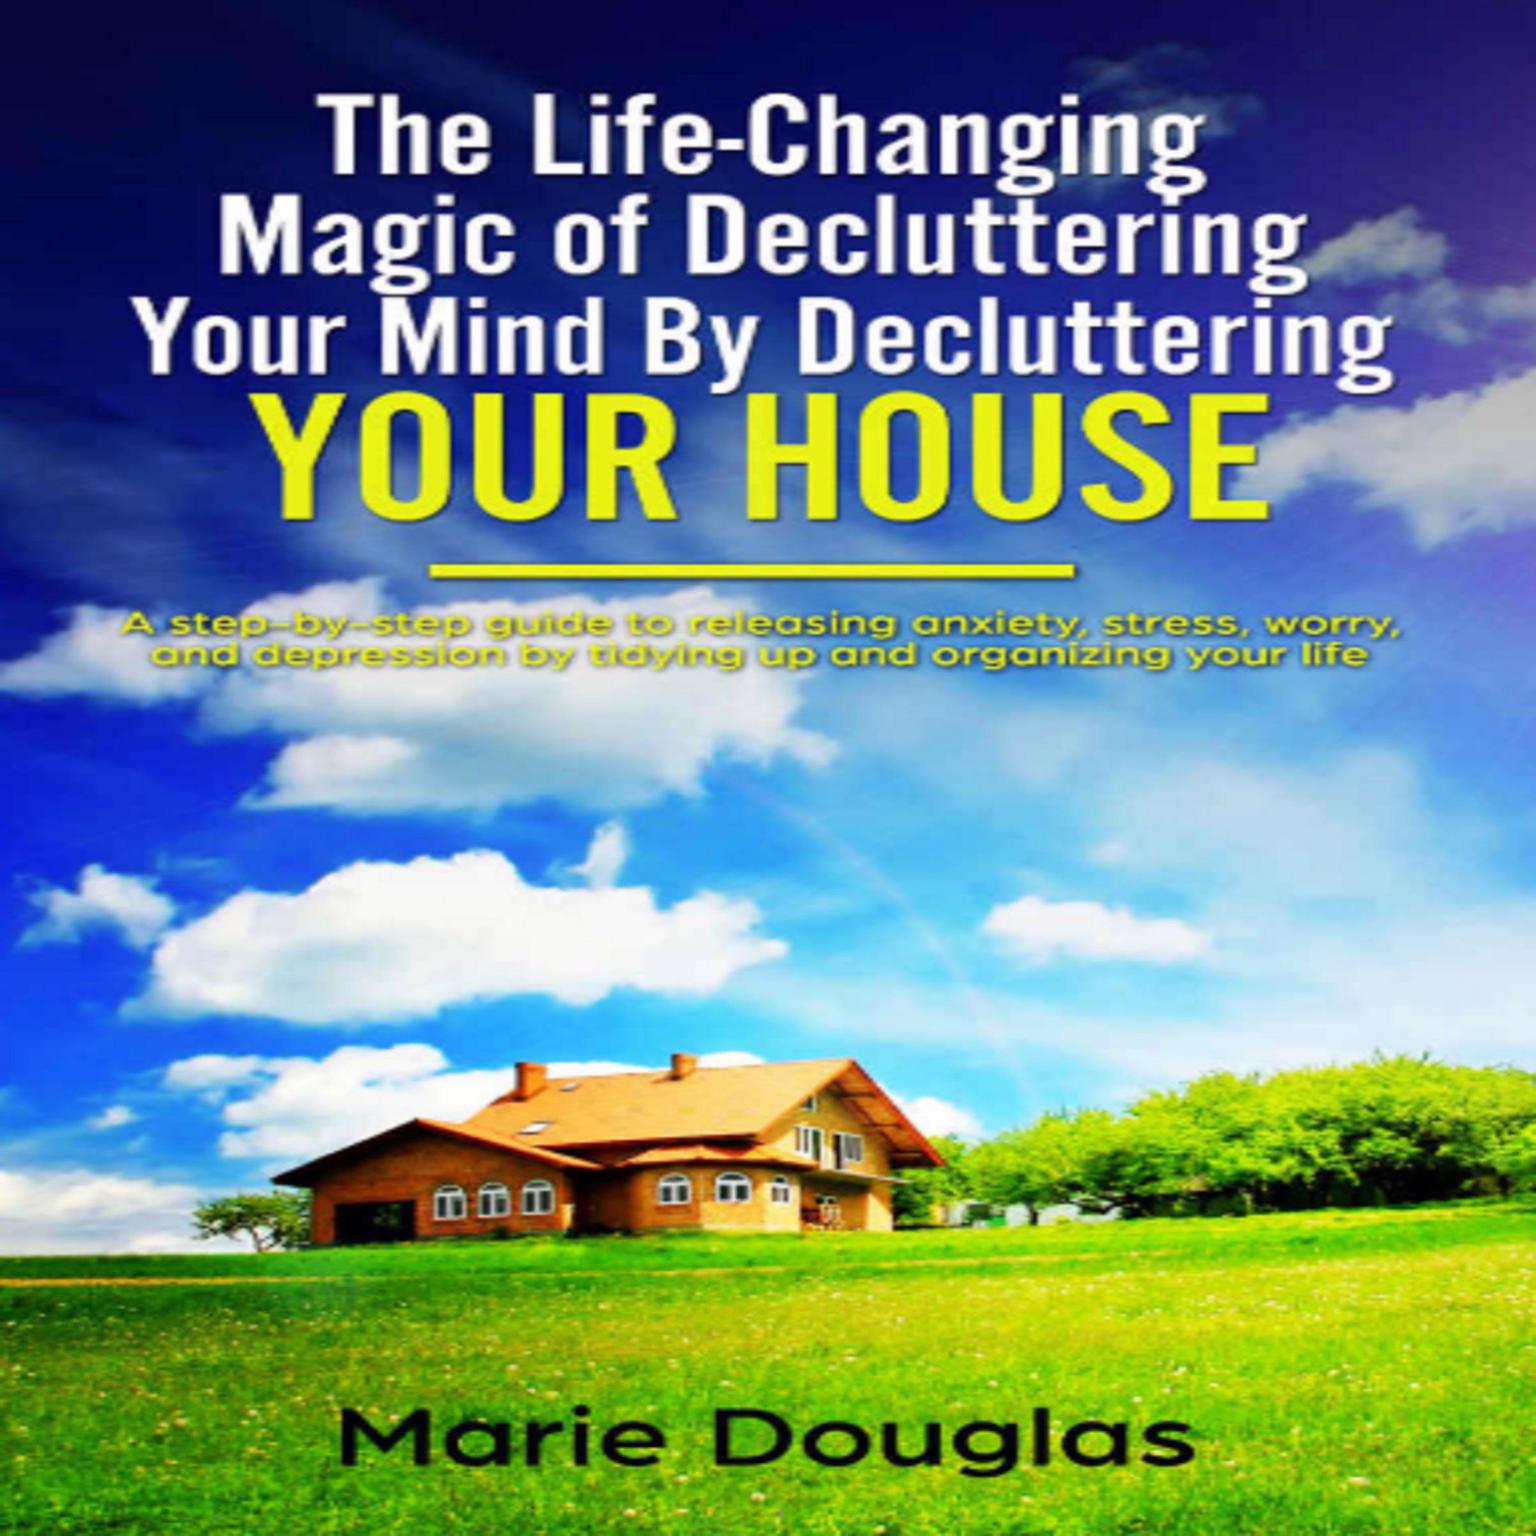 The Life-Changing Magic of Decluttering Your Mind By Decluttering Your House Audiobook, by Marie Douglas